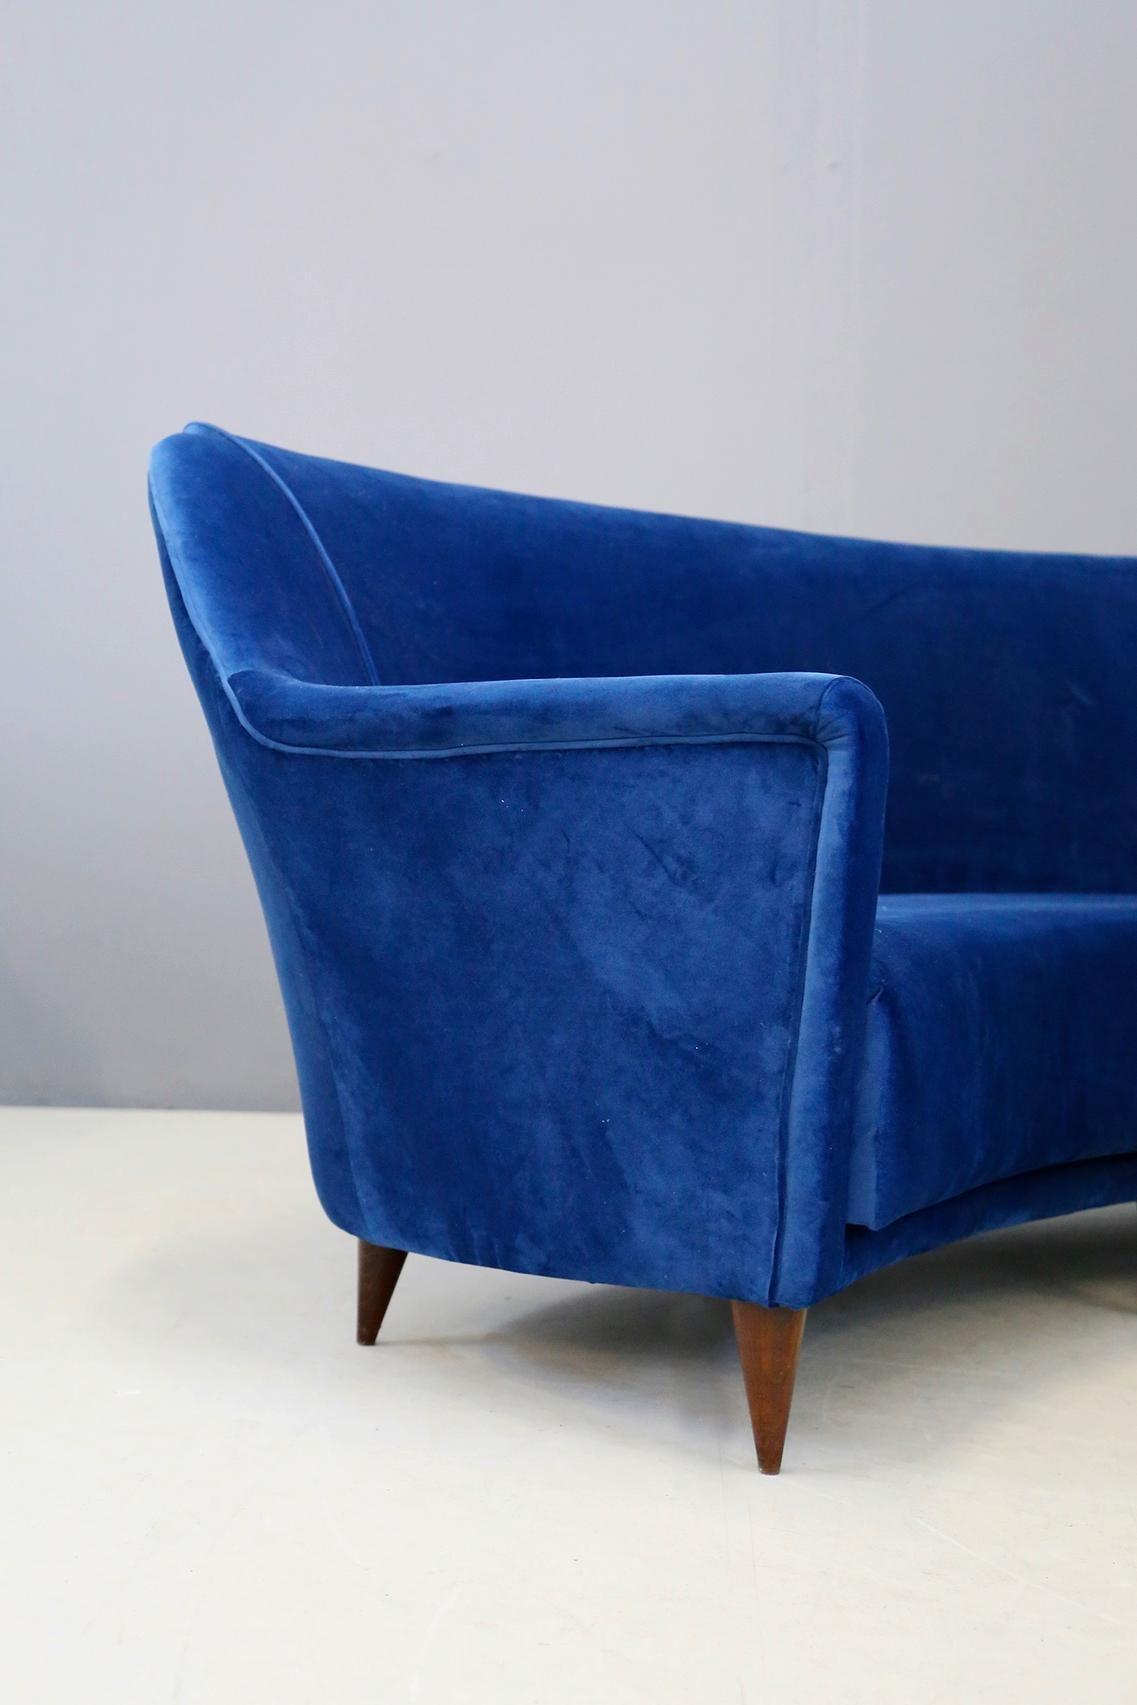 Curved sofa in wood and blue velvet fabric restored, attributed to Ico Parisi and created for Ariberto Colombo Cantù 1950s. The sofa has two or three seats. The peculiarity of the sofa is its pointed armrest with a very geometric line. The sofa is